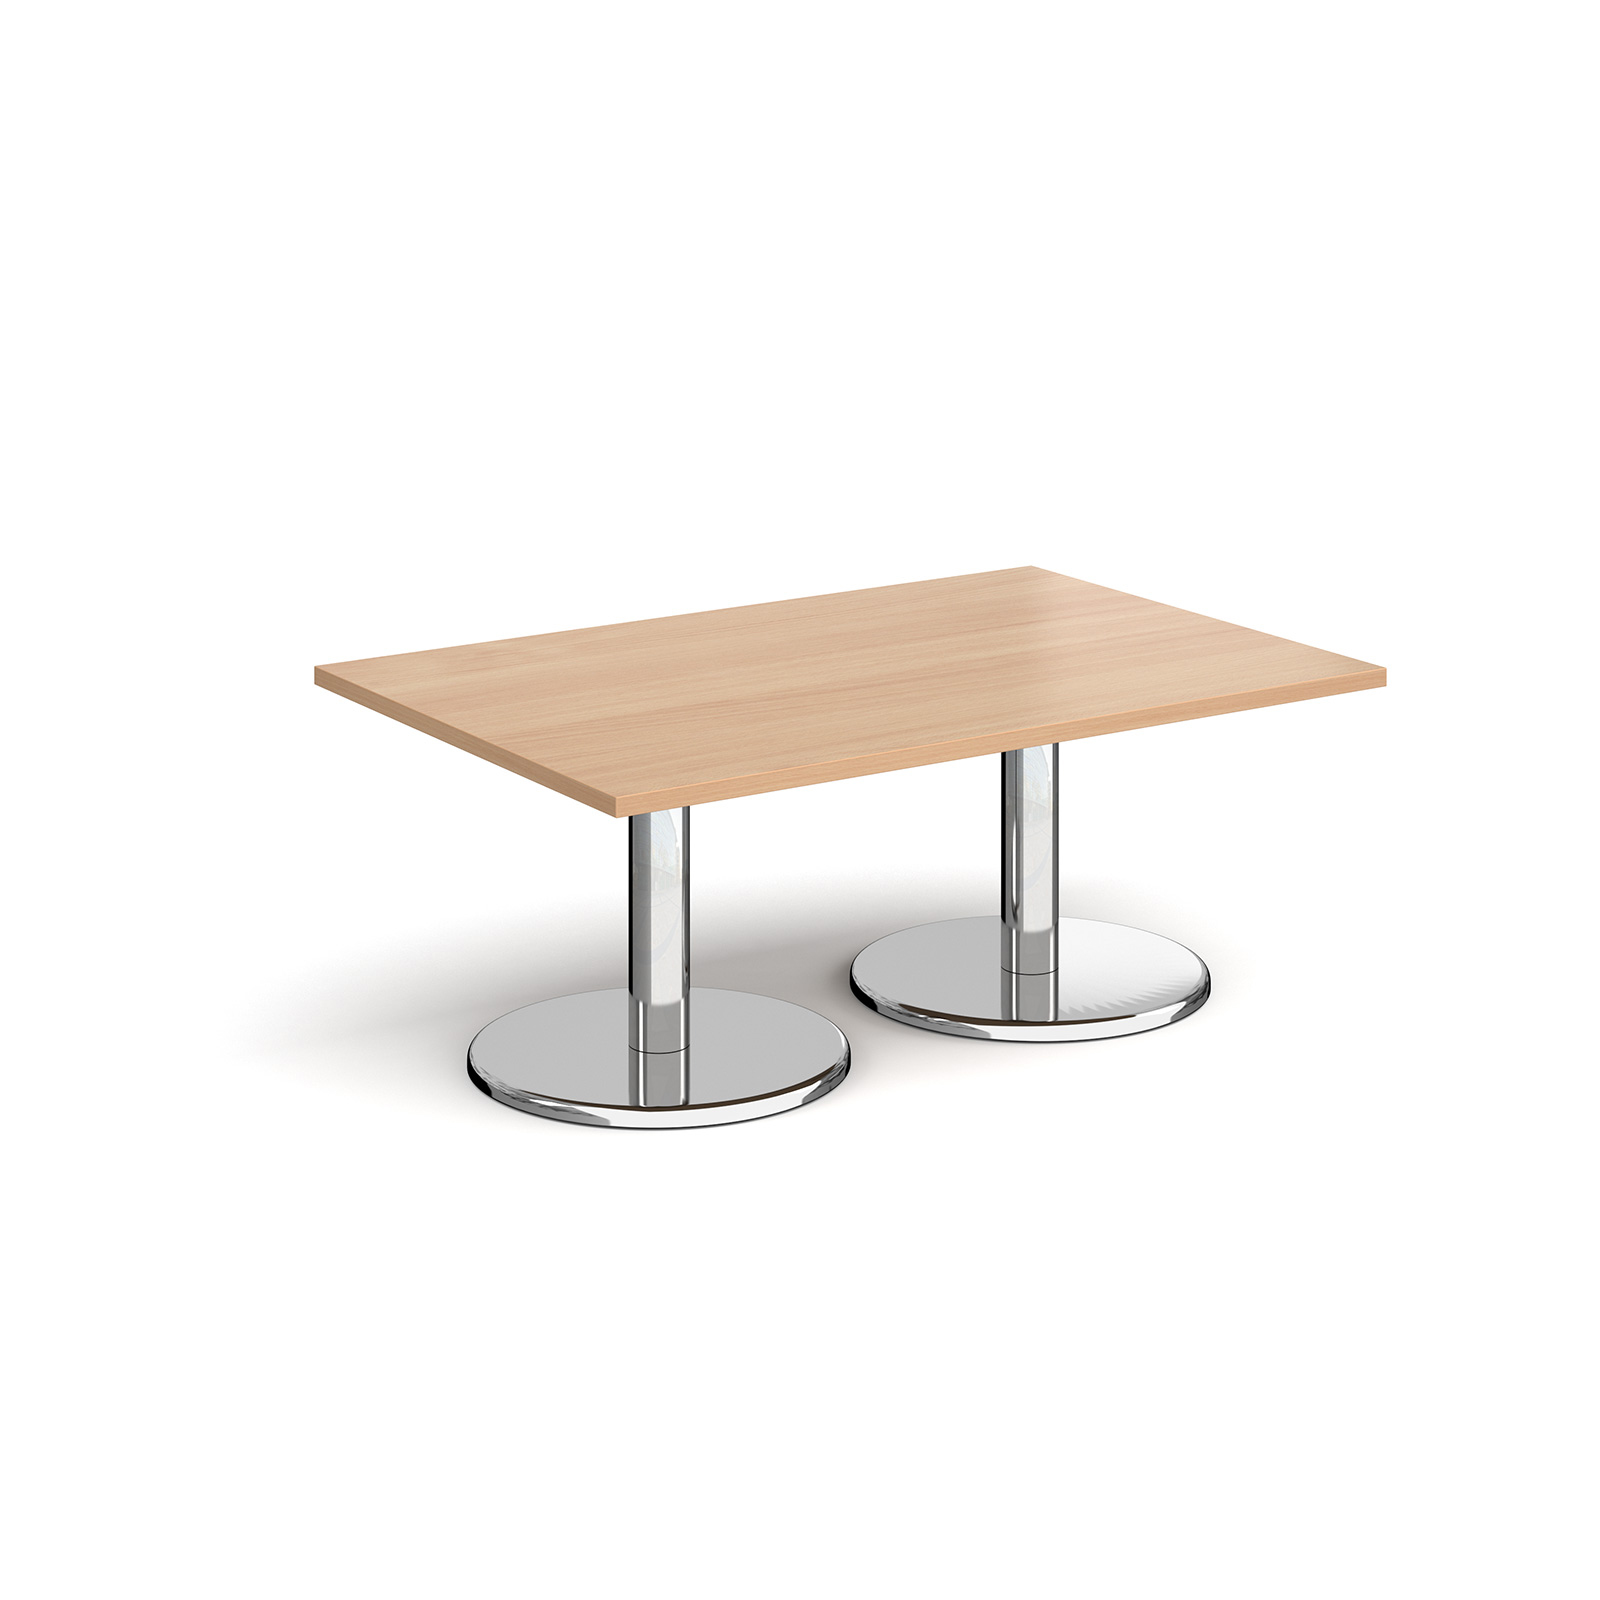 Pisa rectangular coffee table with round chrome bases 1200mm x 800mm - beech